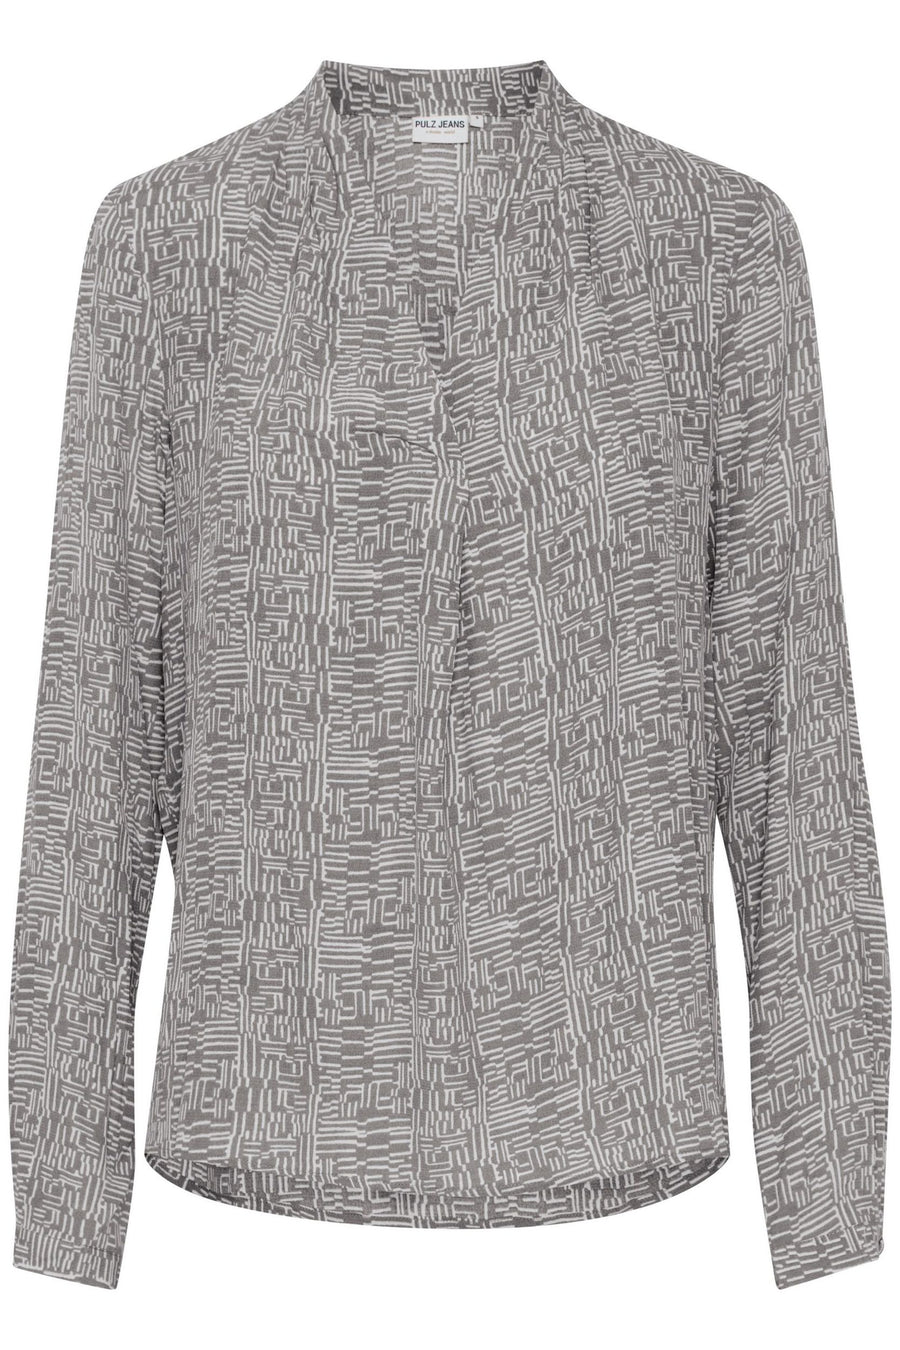 Pulz Pzgene Bluse frost gray printed